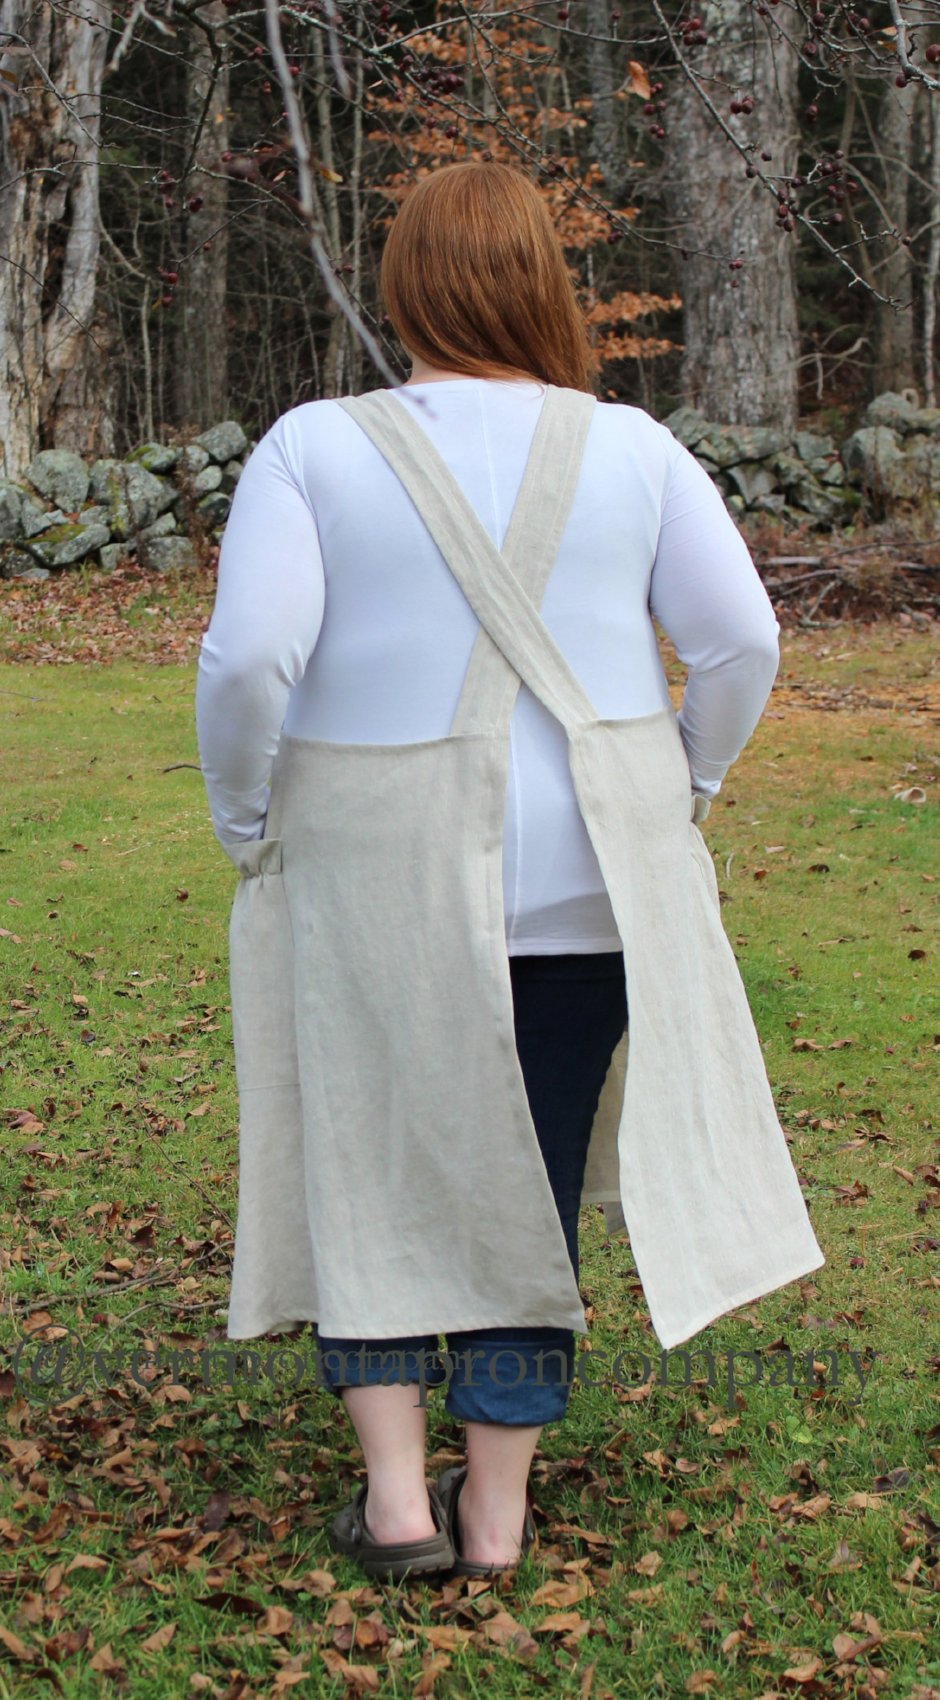 XS-5X No Tie Crossback Apron in Oatmeal 100% Flax Linen, plus size, back view